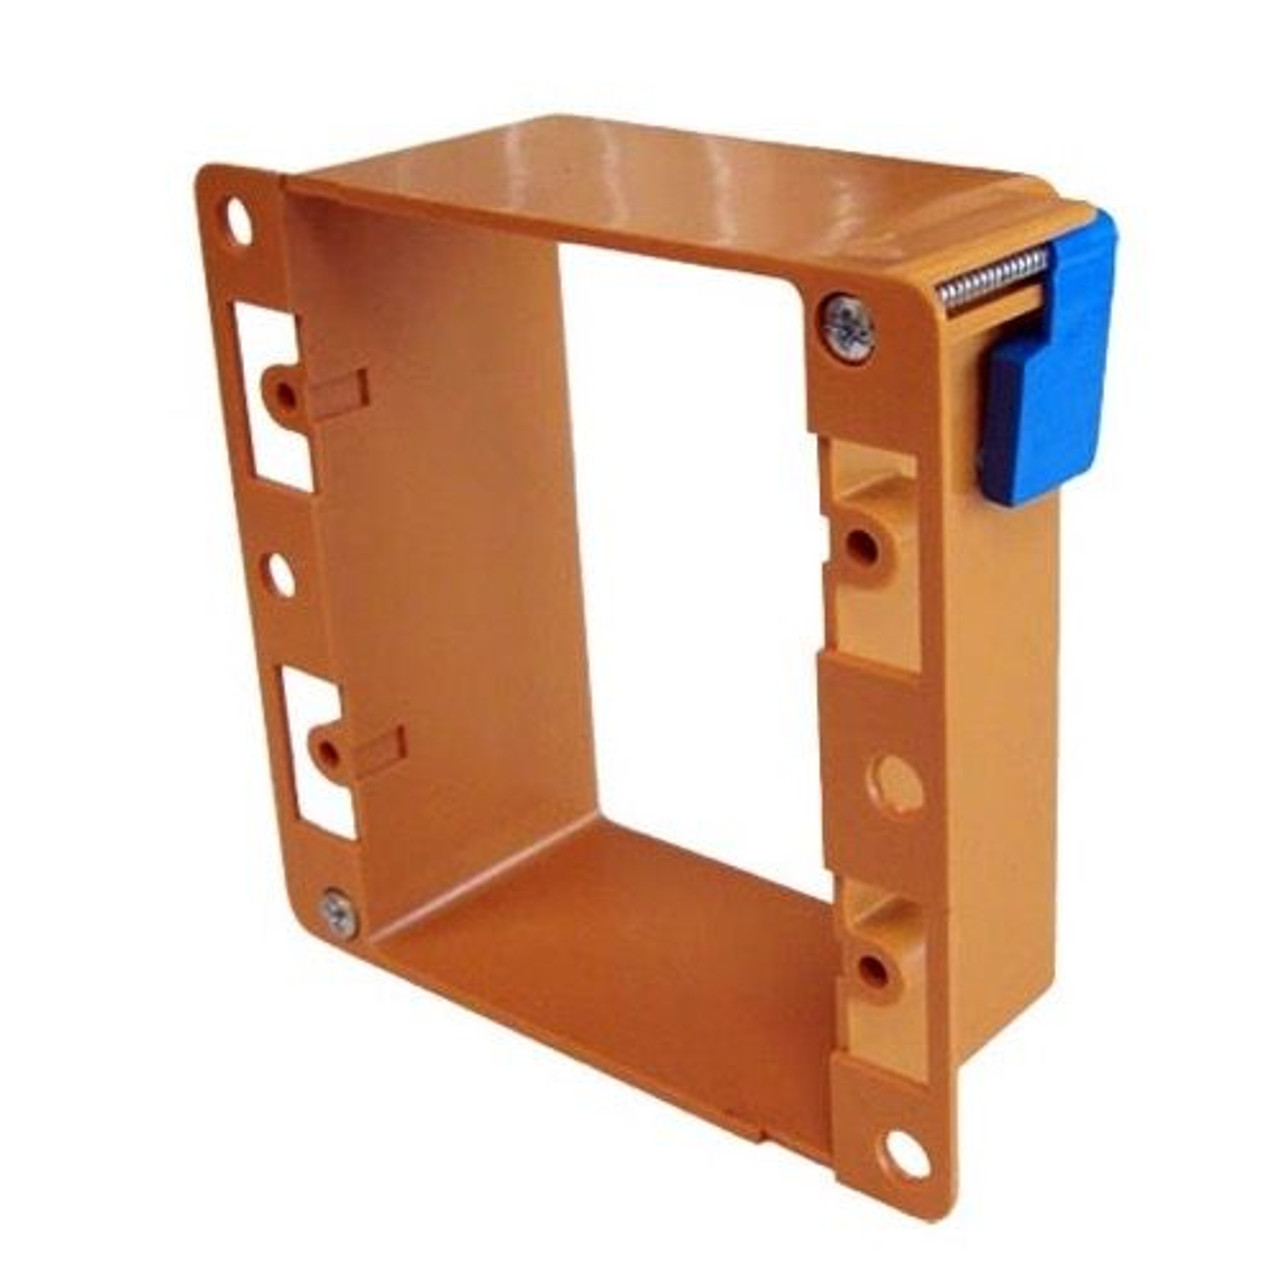 Eagle Wall Plate Mounting Bracket 2 Gang Low Voltage Plastic Box